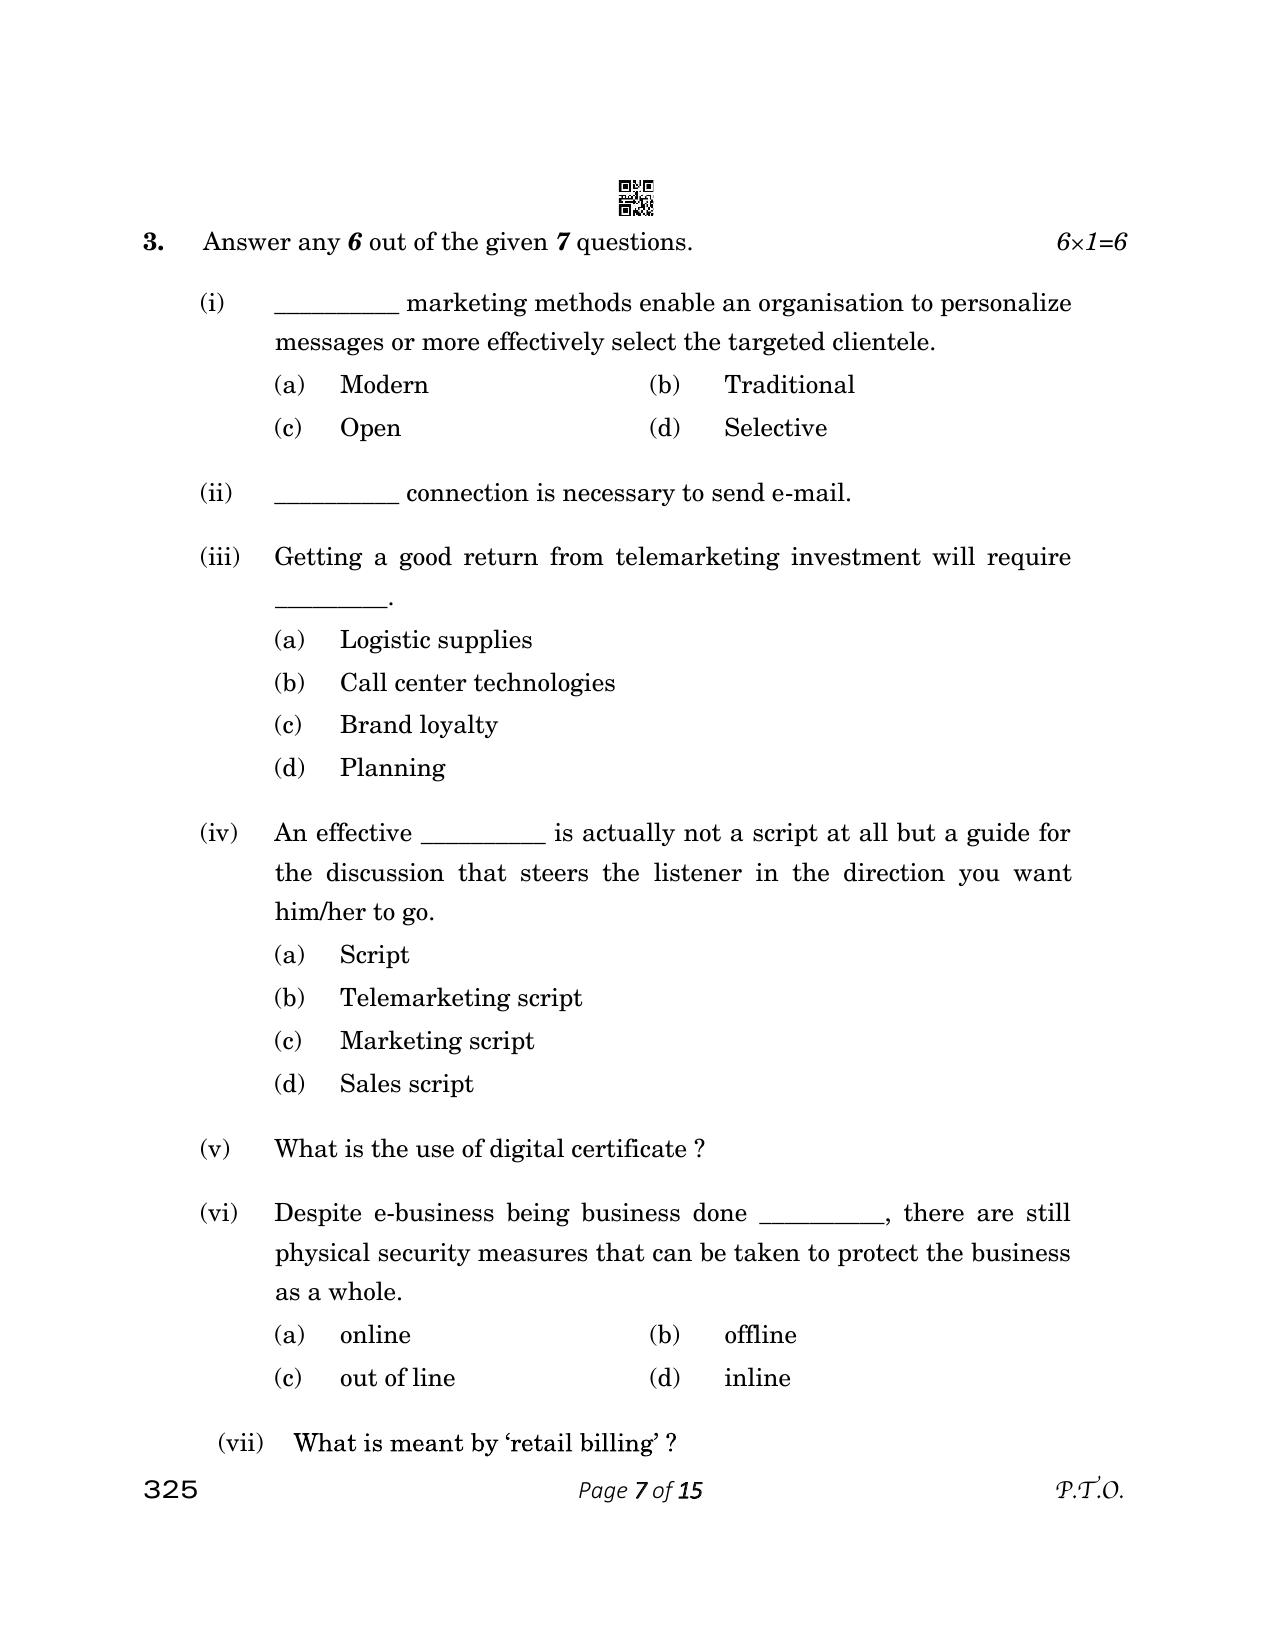 CBSE Class 12 325 Retail 2023 Question Paper - Page 7